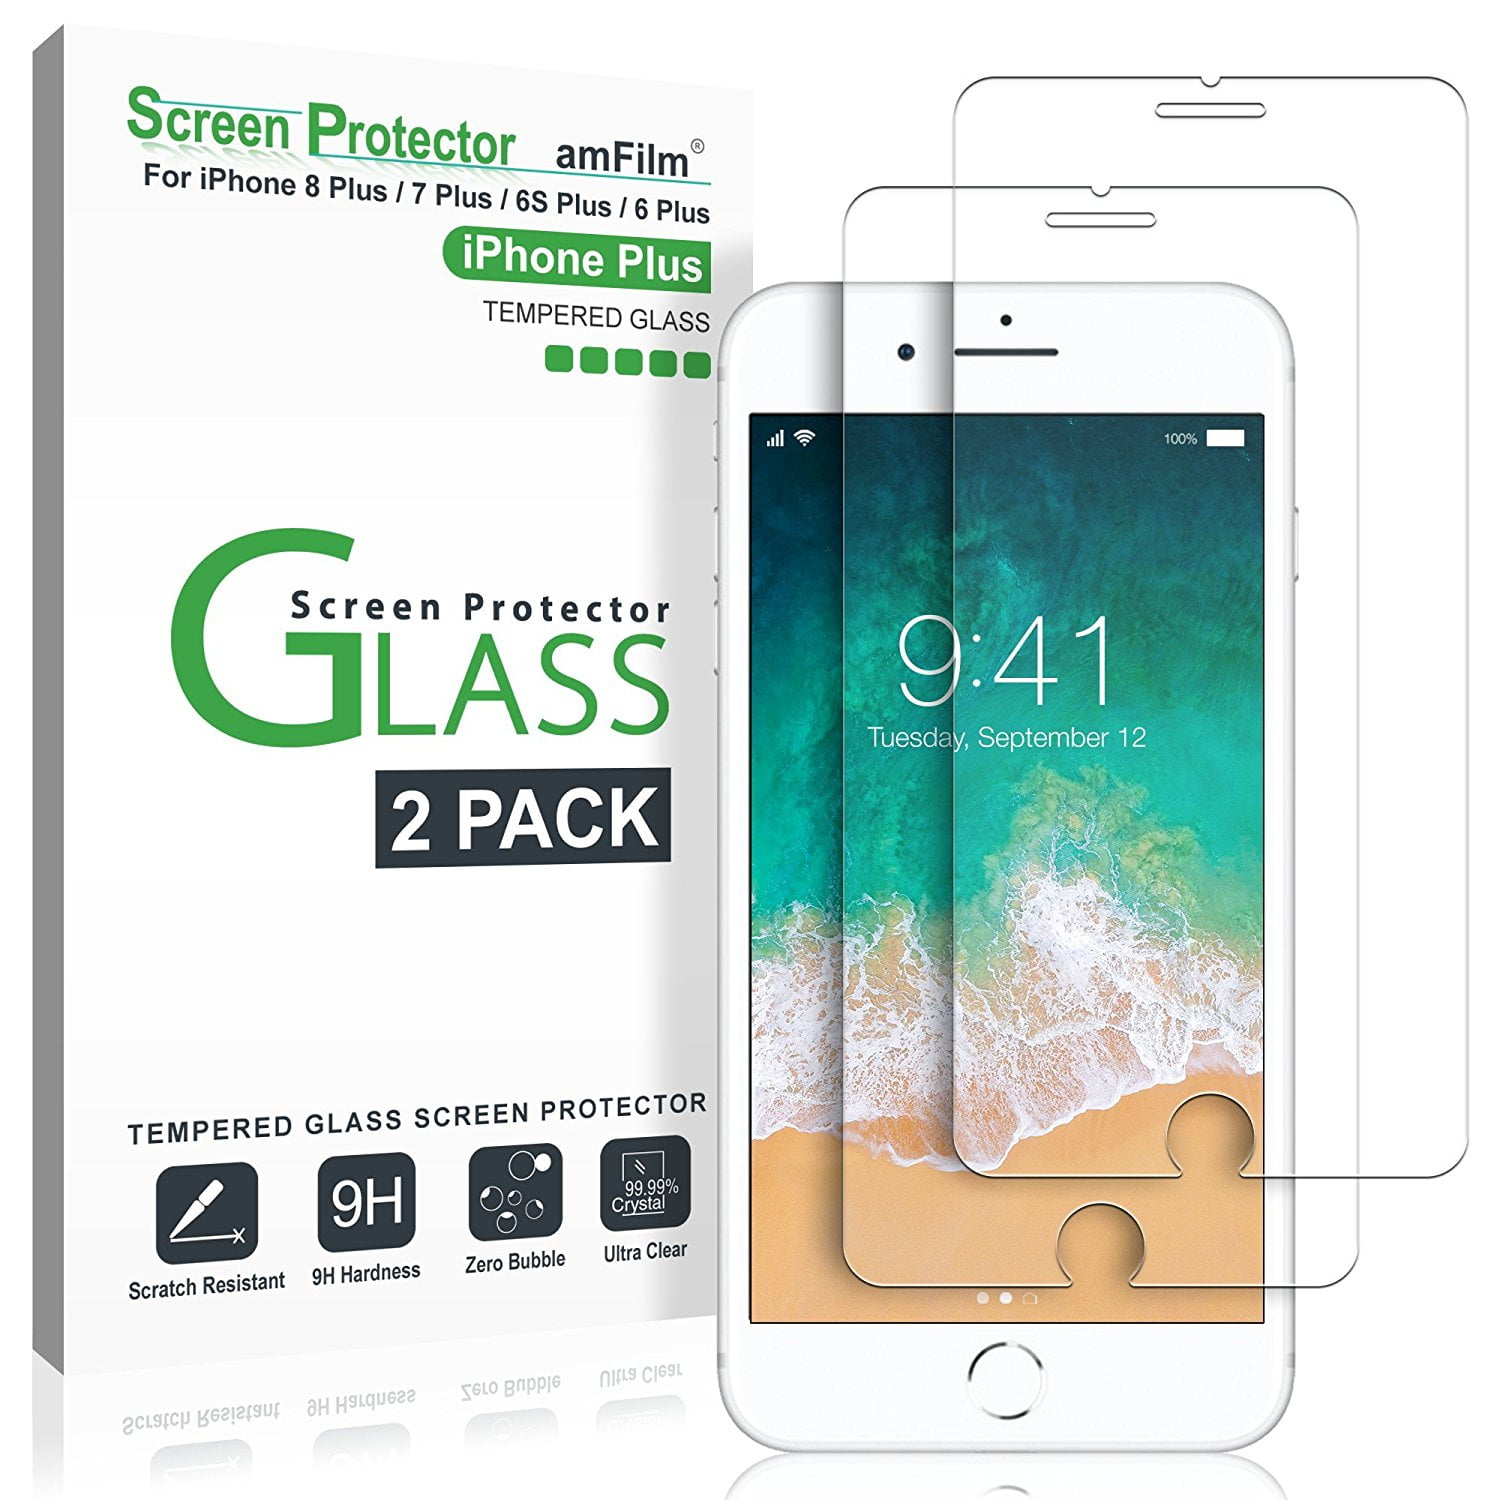 Glass Screen Protector for iPhone 6/7/8 Plus or iPhone 6s/7s/8s Plus 3 Pack Easy Installation & Fits Most Cases Tempered Glass with Accurate Touch and Anti-Scratch and Anti-Smudge